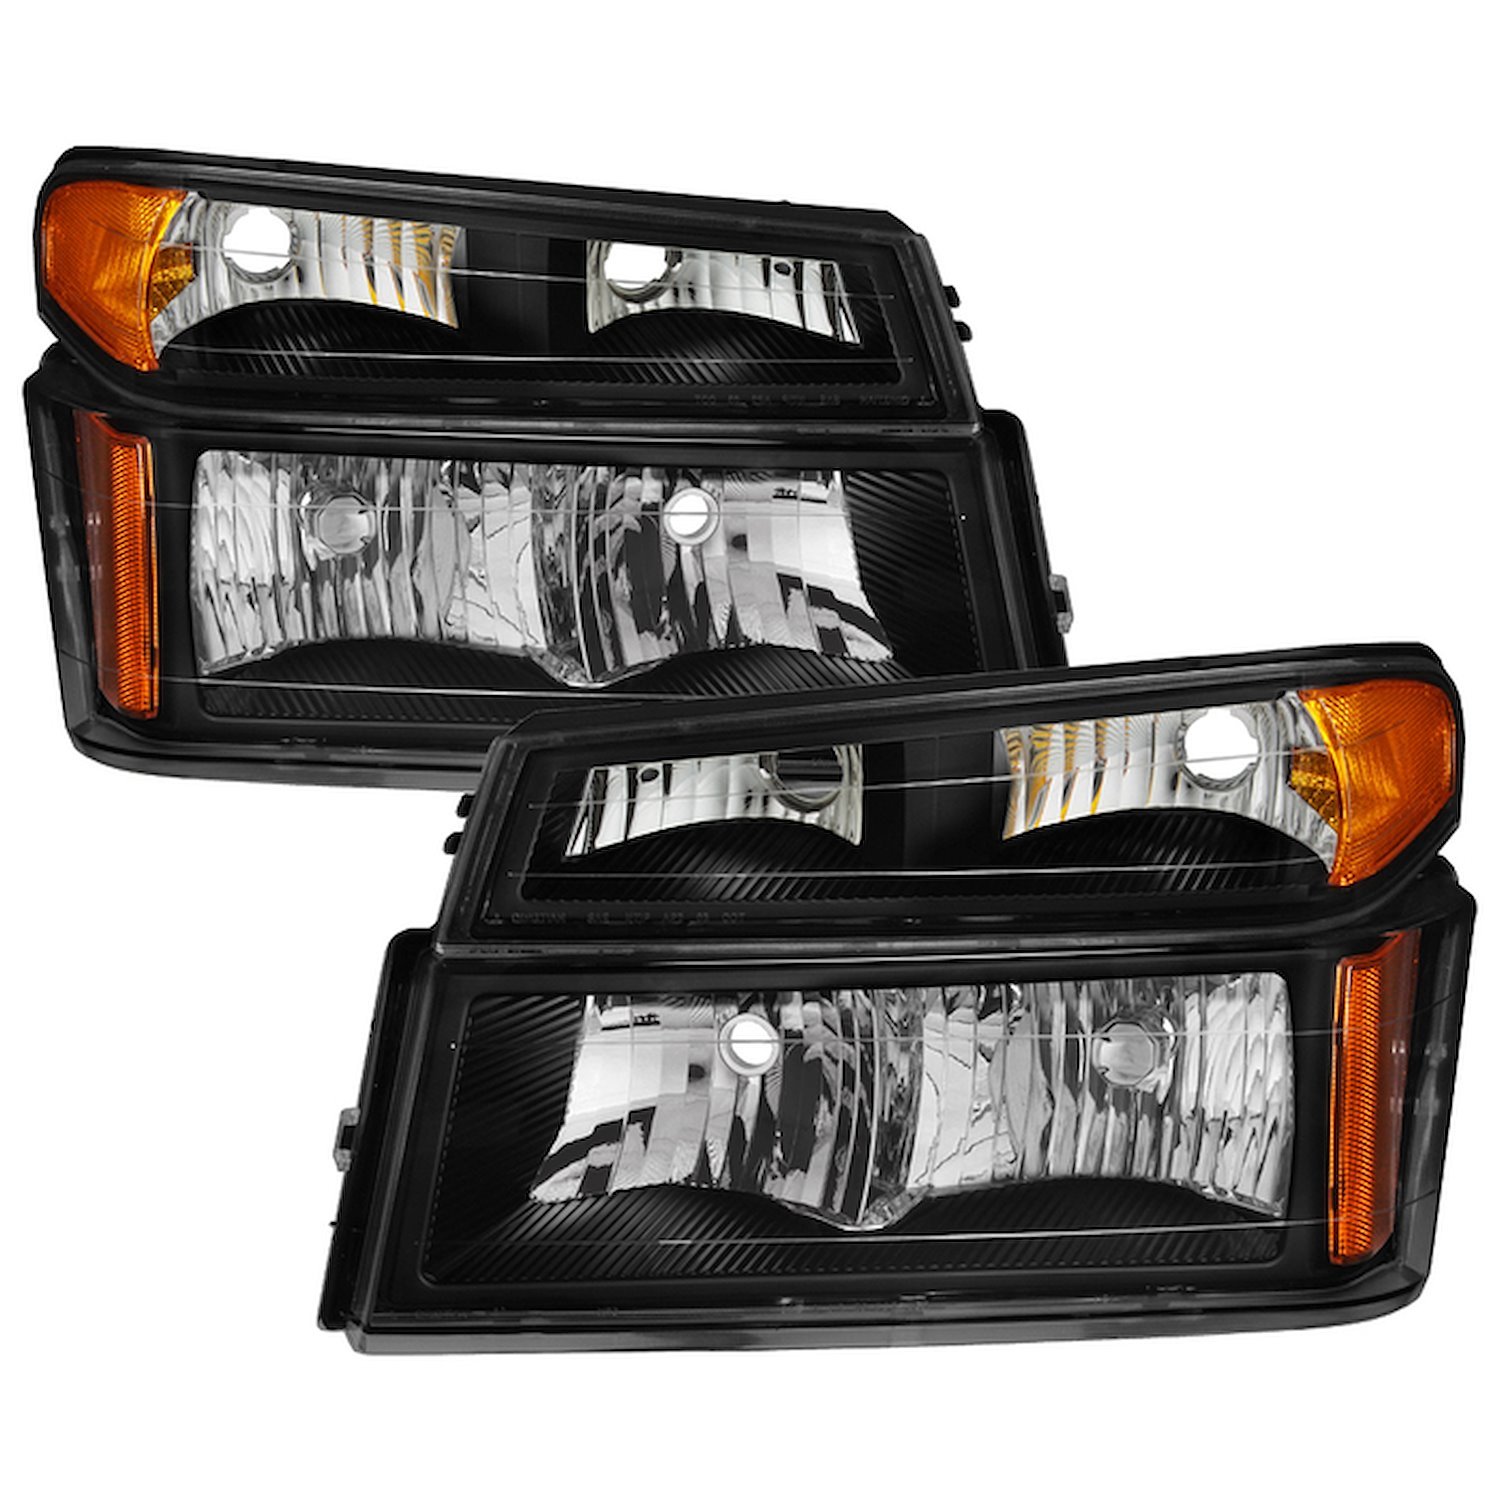 xTune OEM Style Crystal Headlights 2004-2012 Chevy